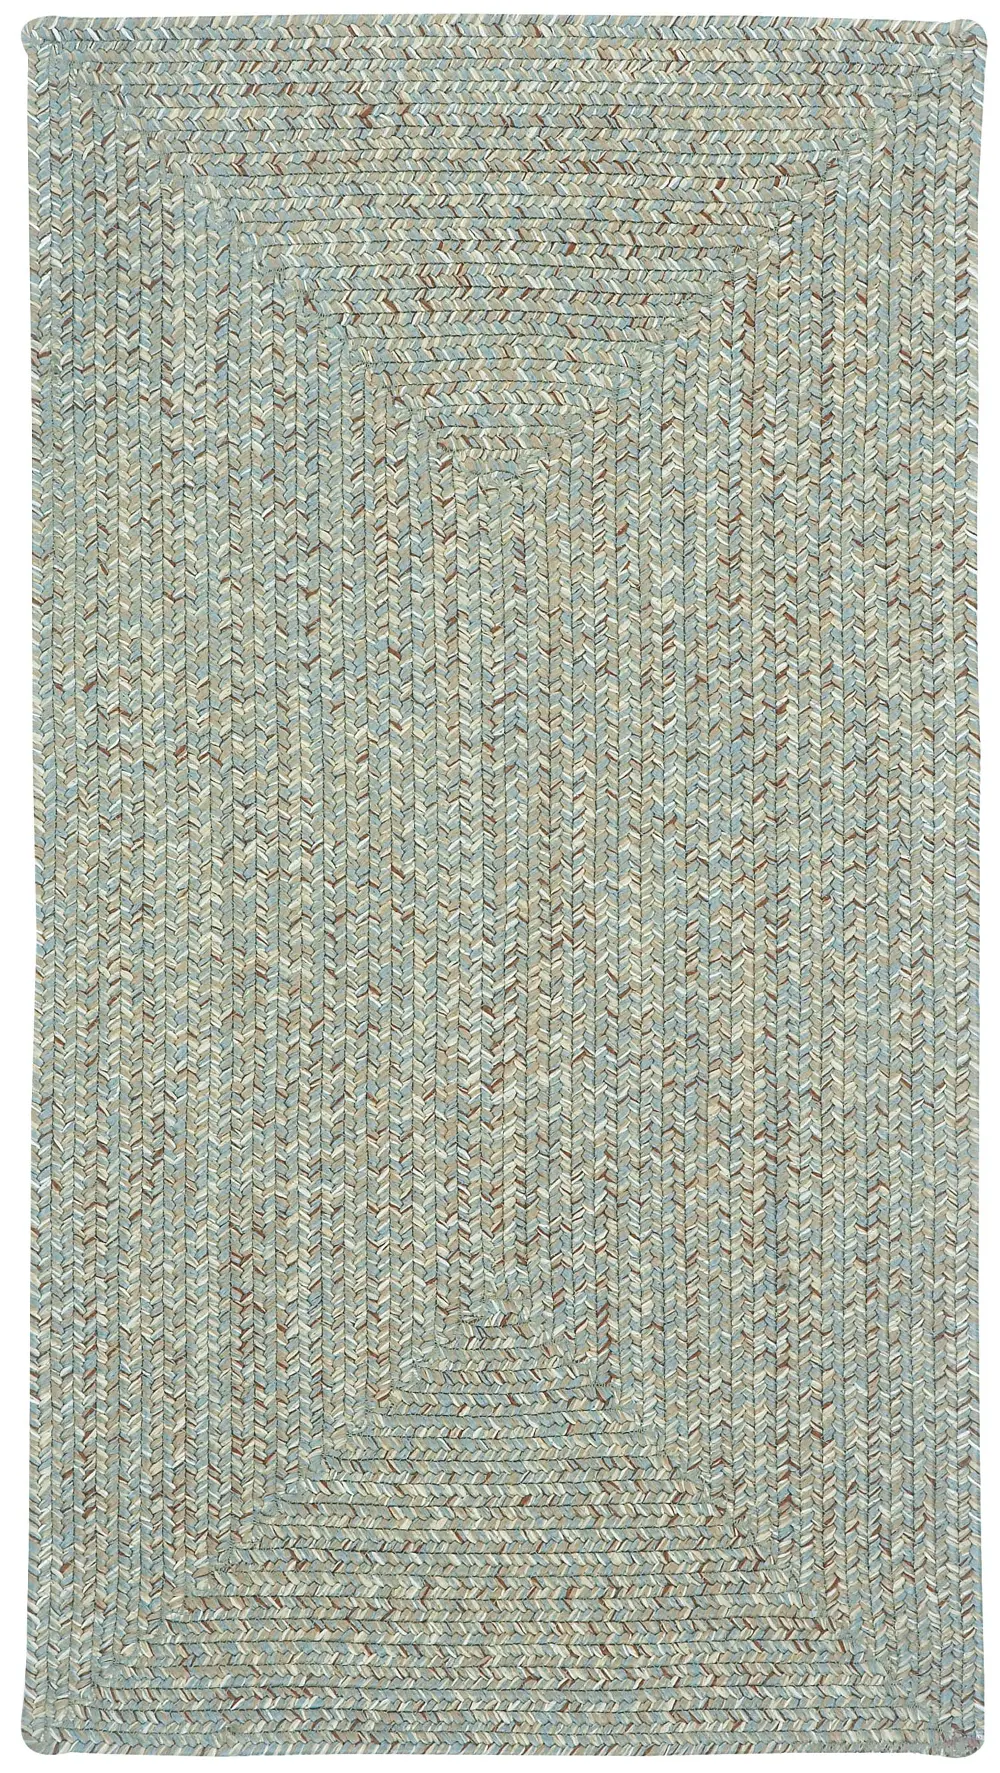 0110QS00240036450 2 x 3 X-Small Spa Green Braided Indoor-Outdoor Rug - Sea Glass-1